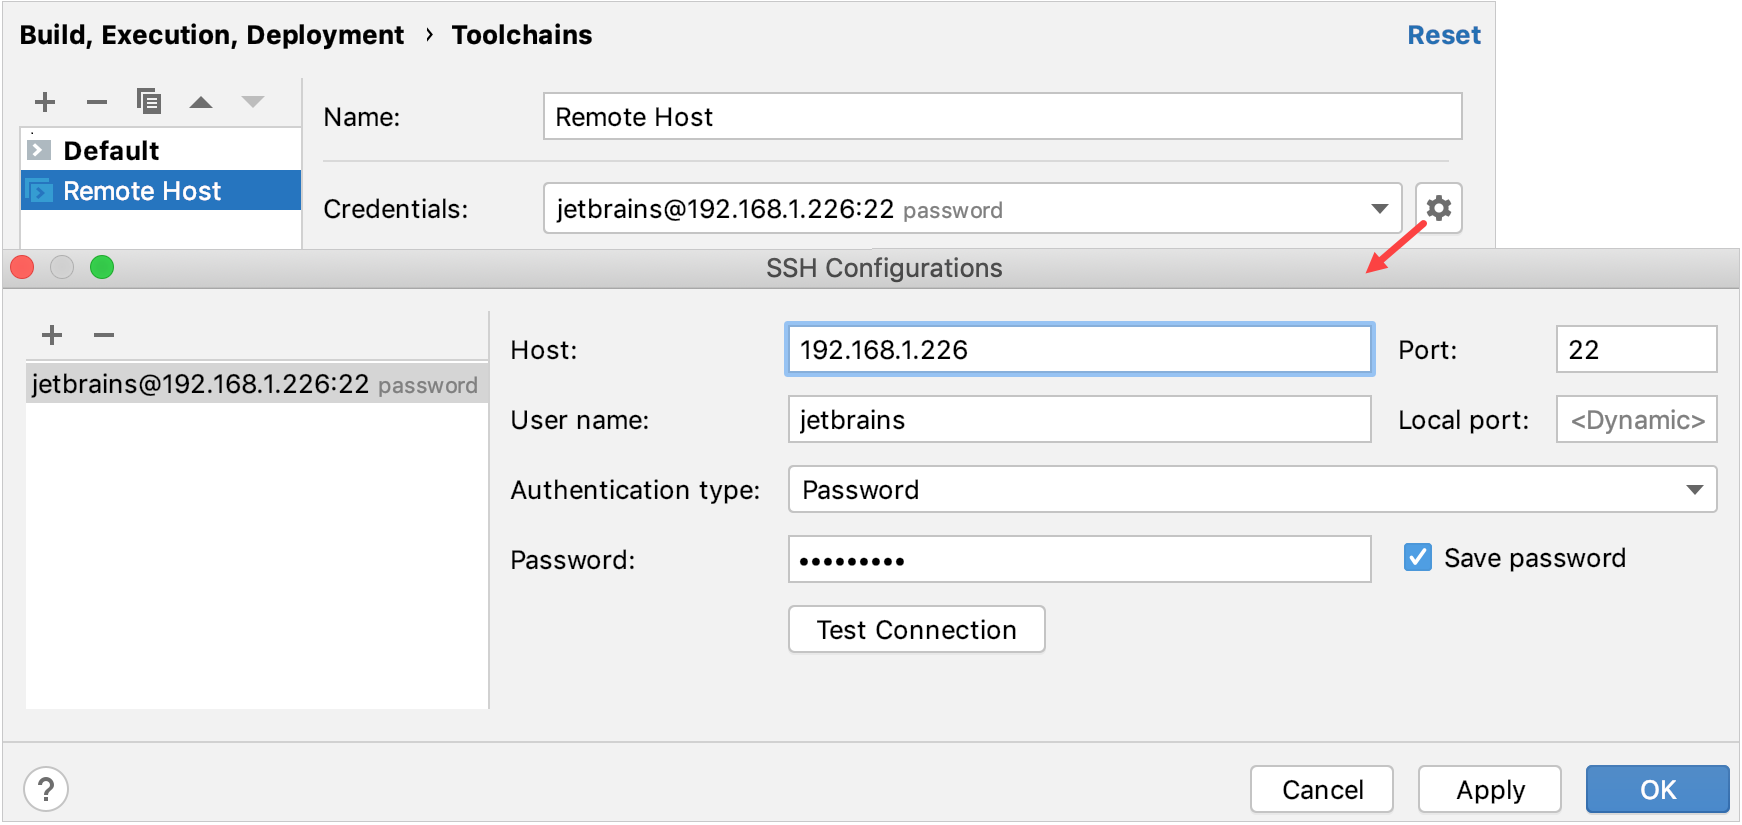 credentials to access the remote host